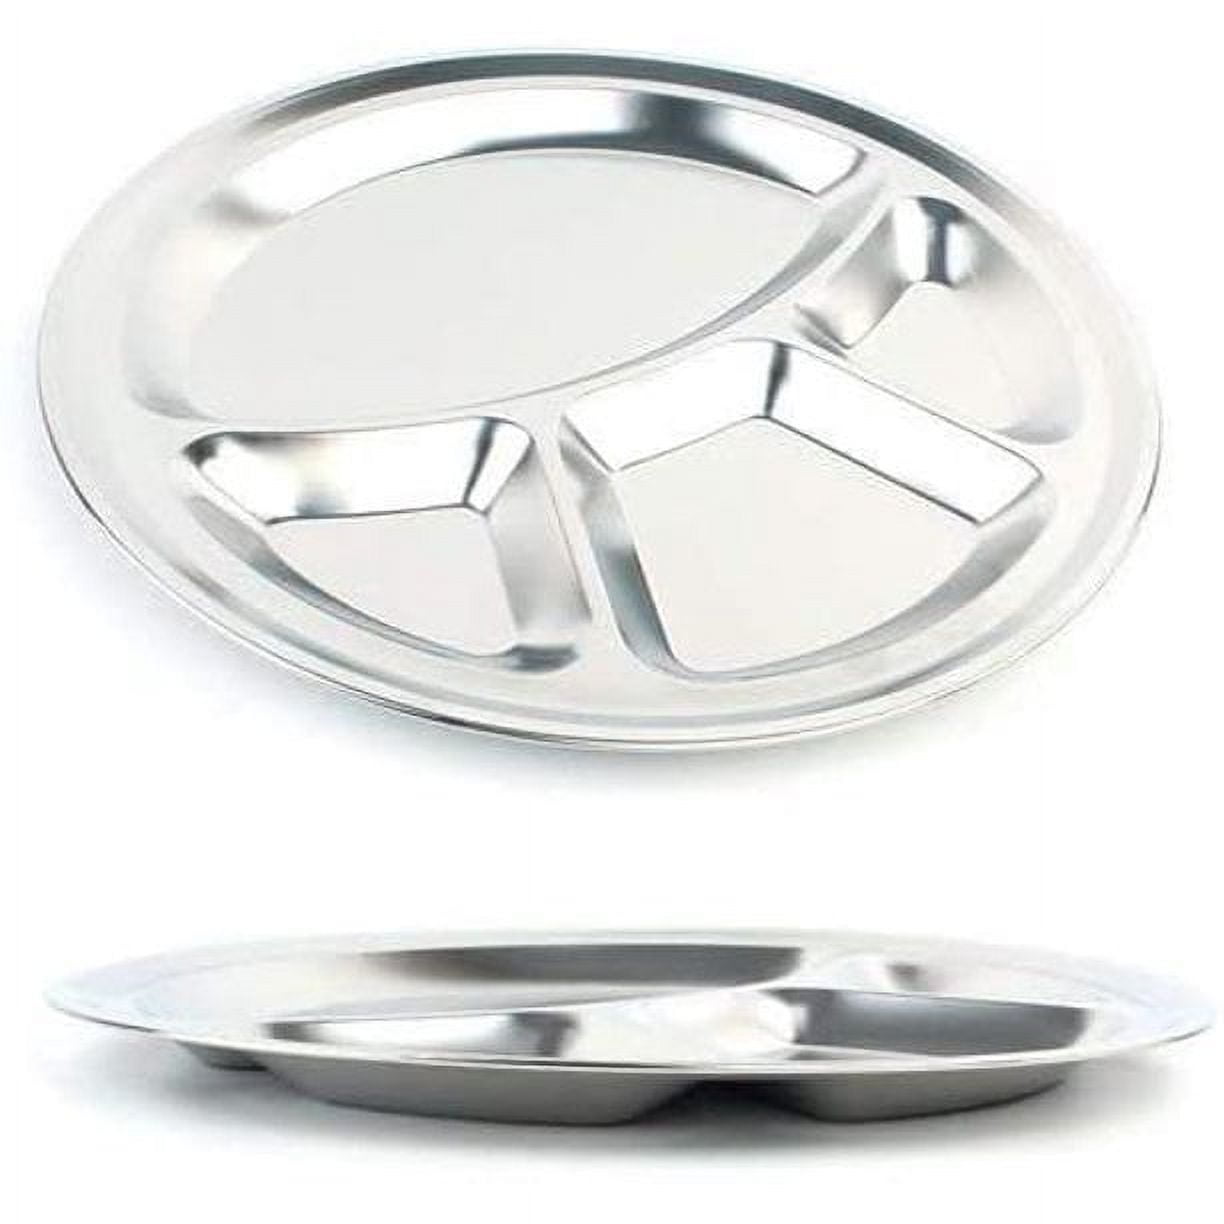 Stainless Steel Divided Plates For Restaurant And Adult Use Perfect For  Serving Bowls With Lids, Bento, And Lunch Tays From Liliyabl, $14.94